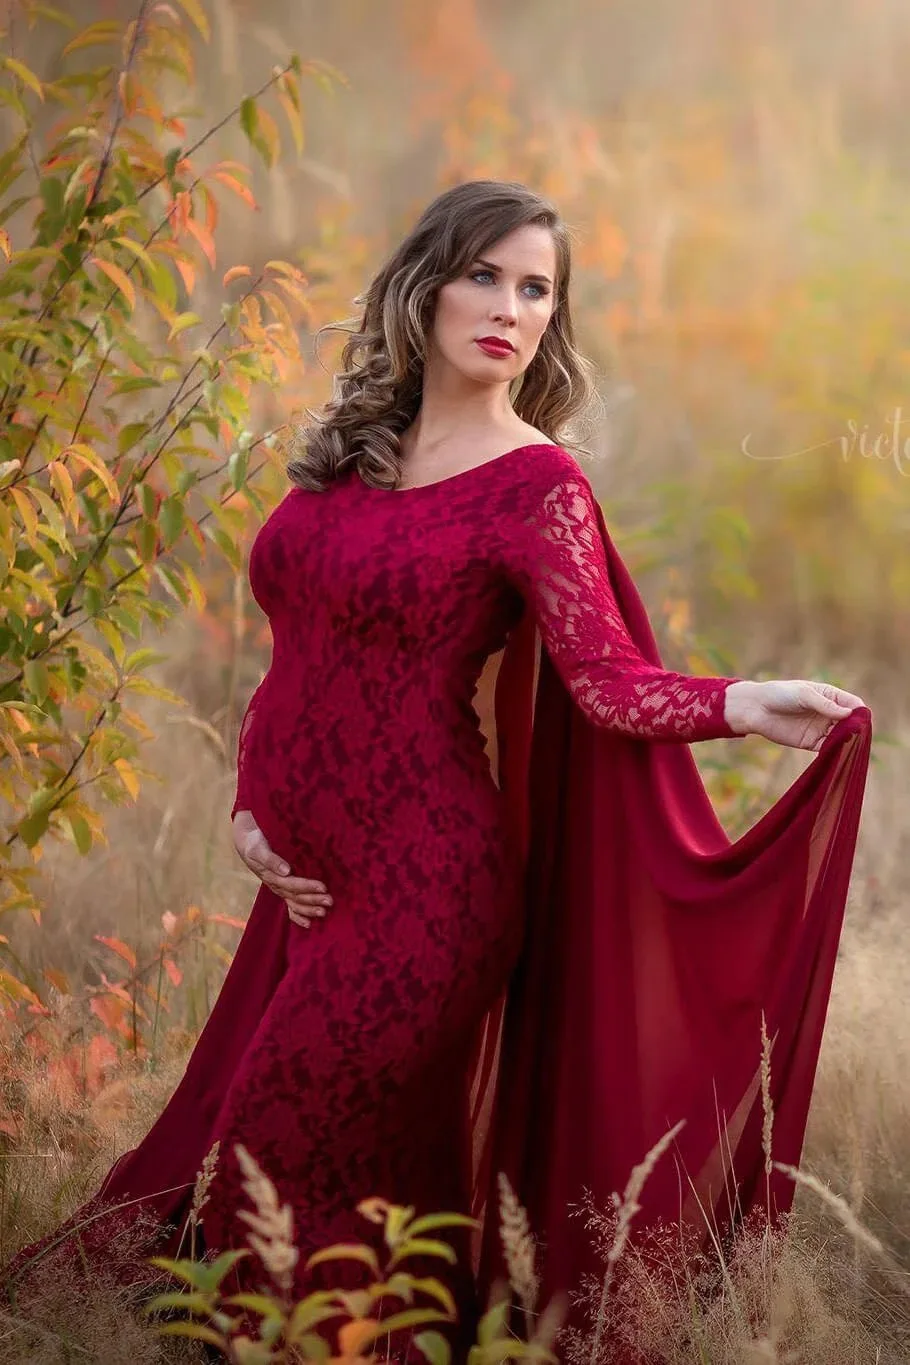 Chiffon Shawl Maternity Dresses For Photo Shoot Lace Fancy Pregnancy Dresses Elegence Pregnant Women Maxi Gown Photography Props (2)